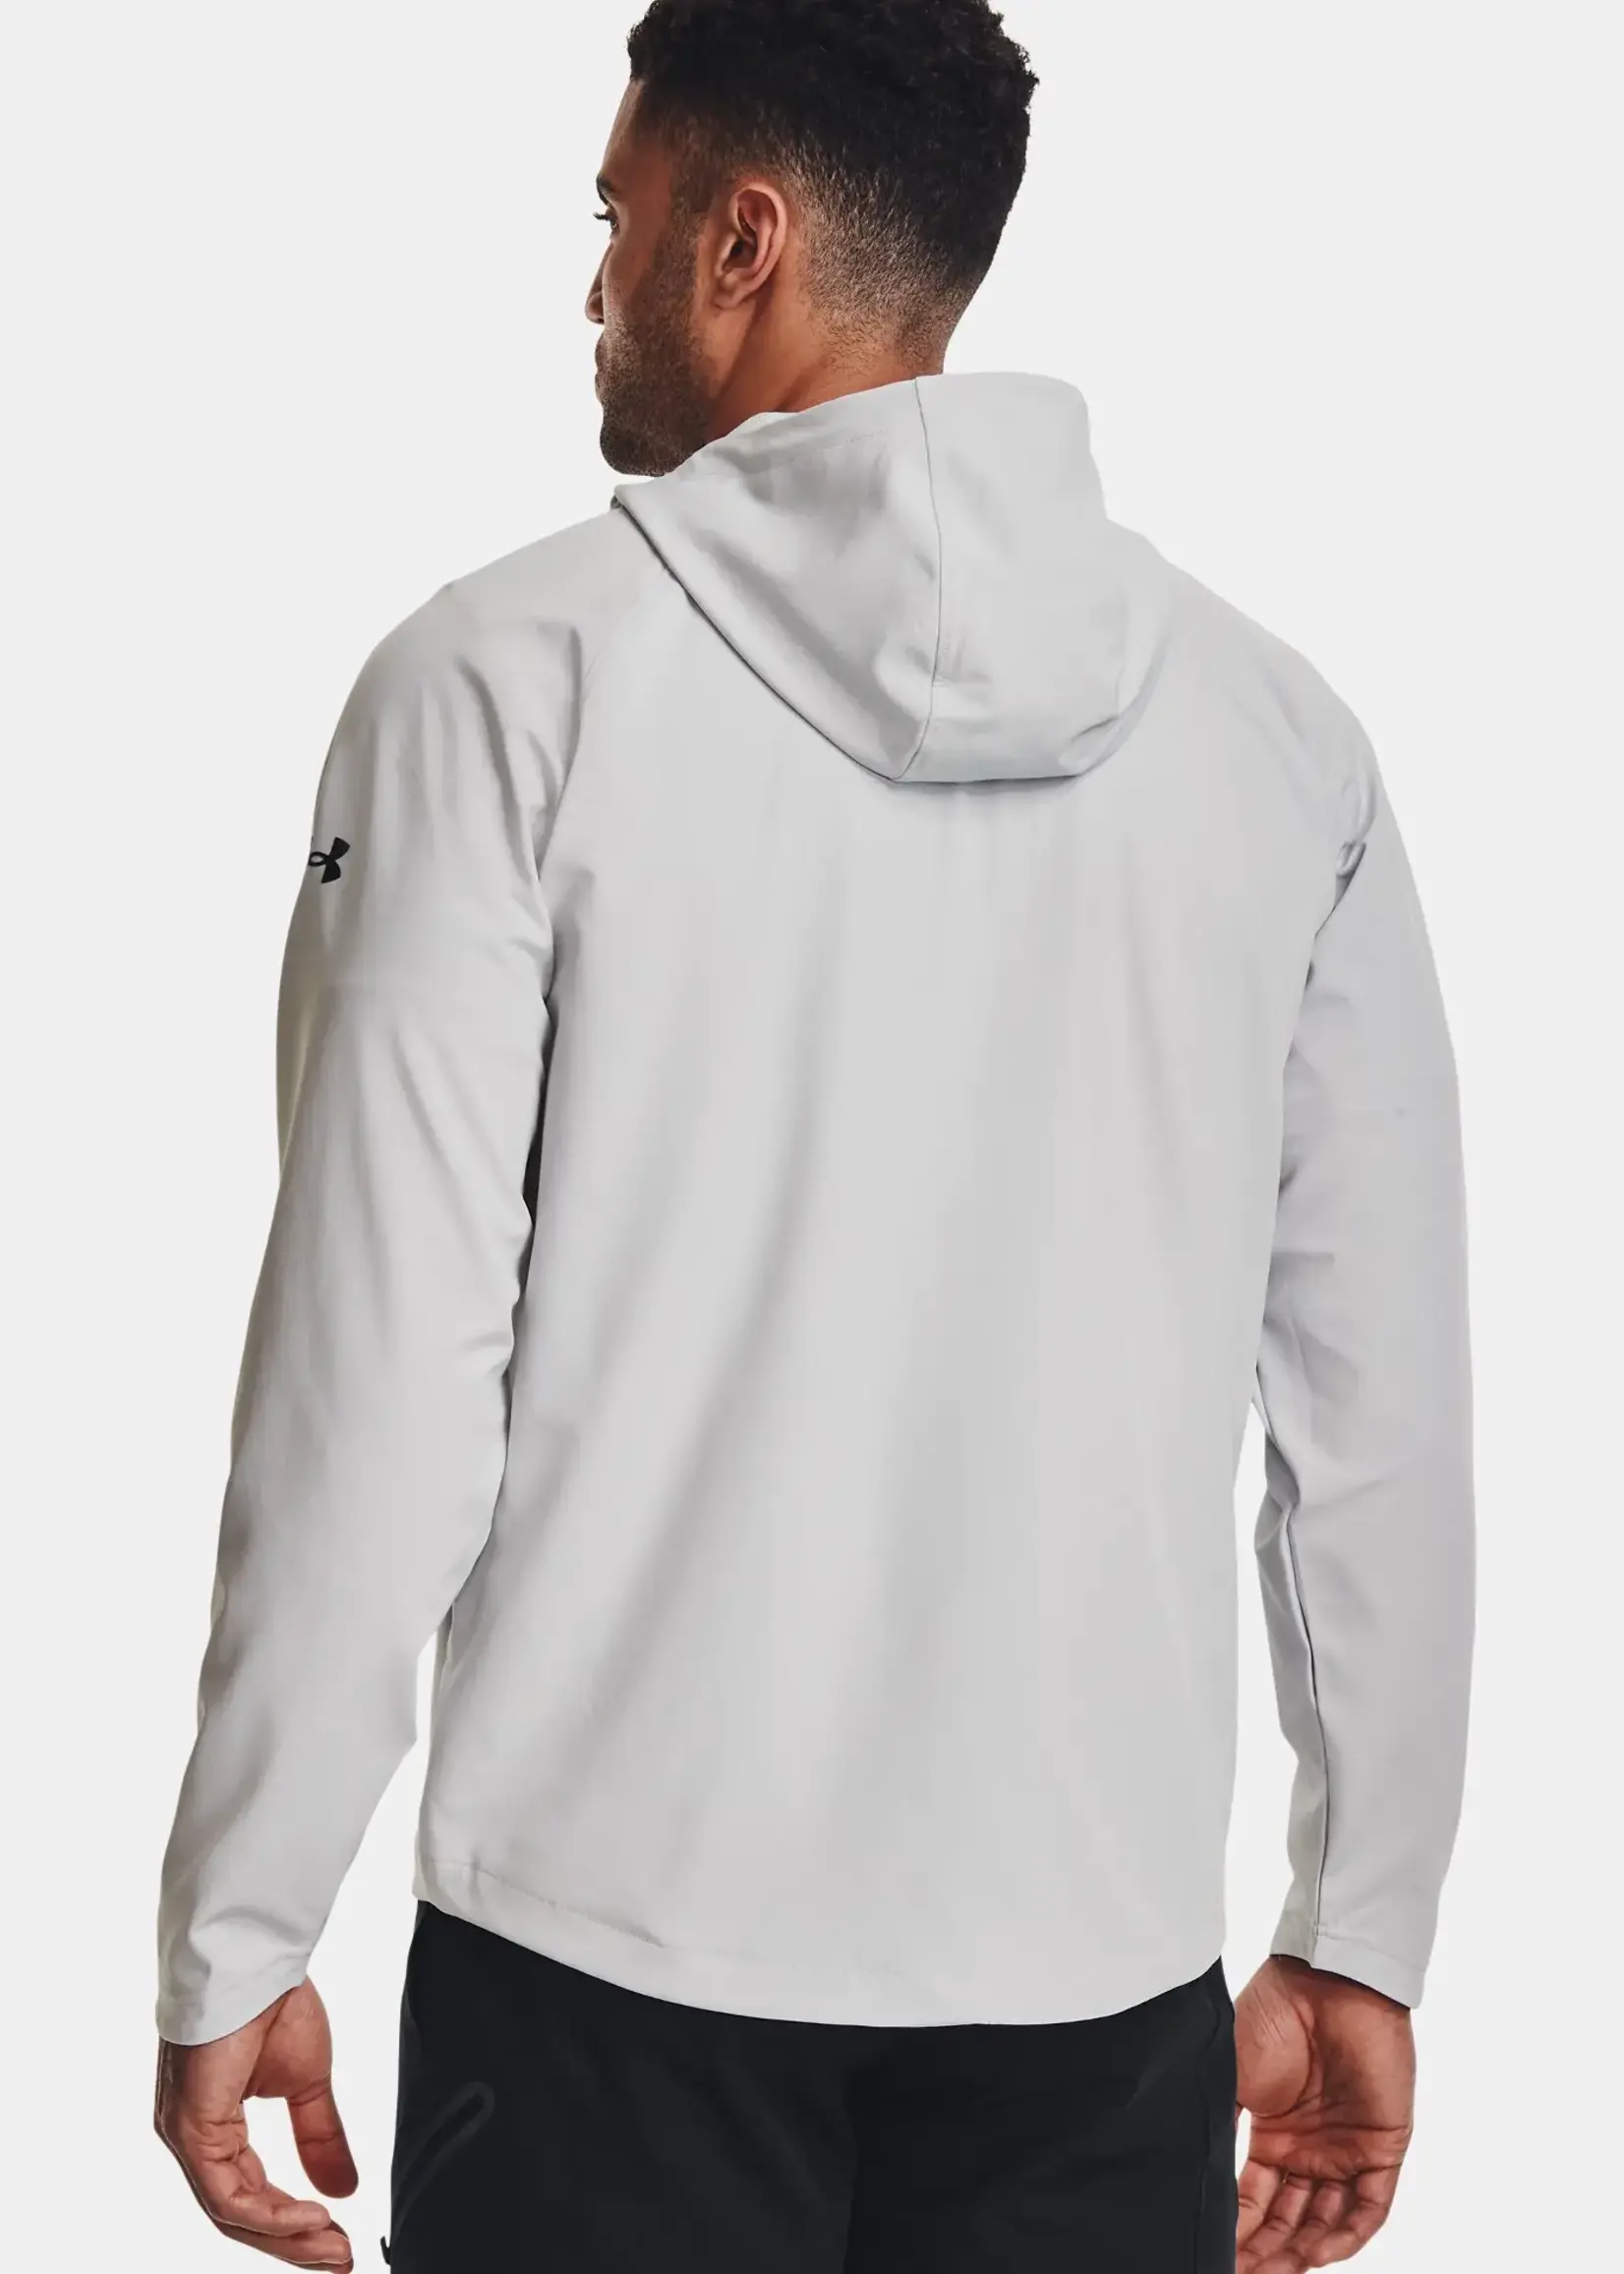 Under Armour Ua Unstoppable Jacket-Gry